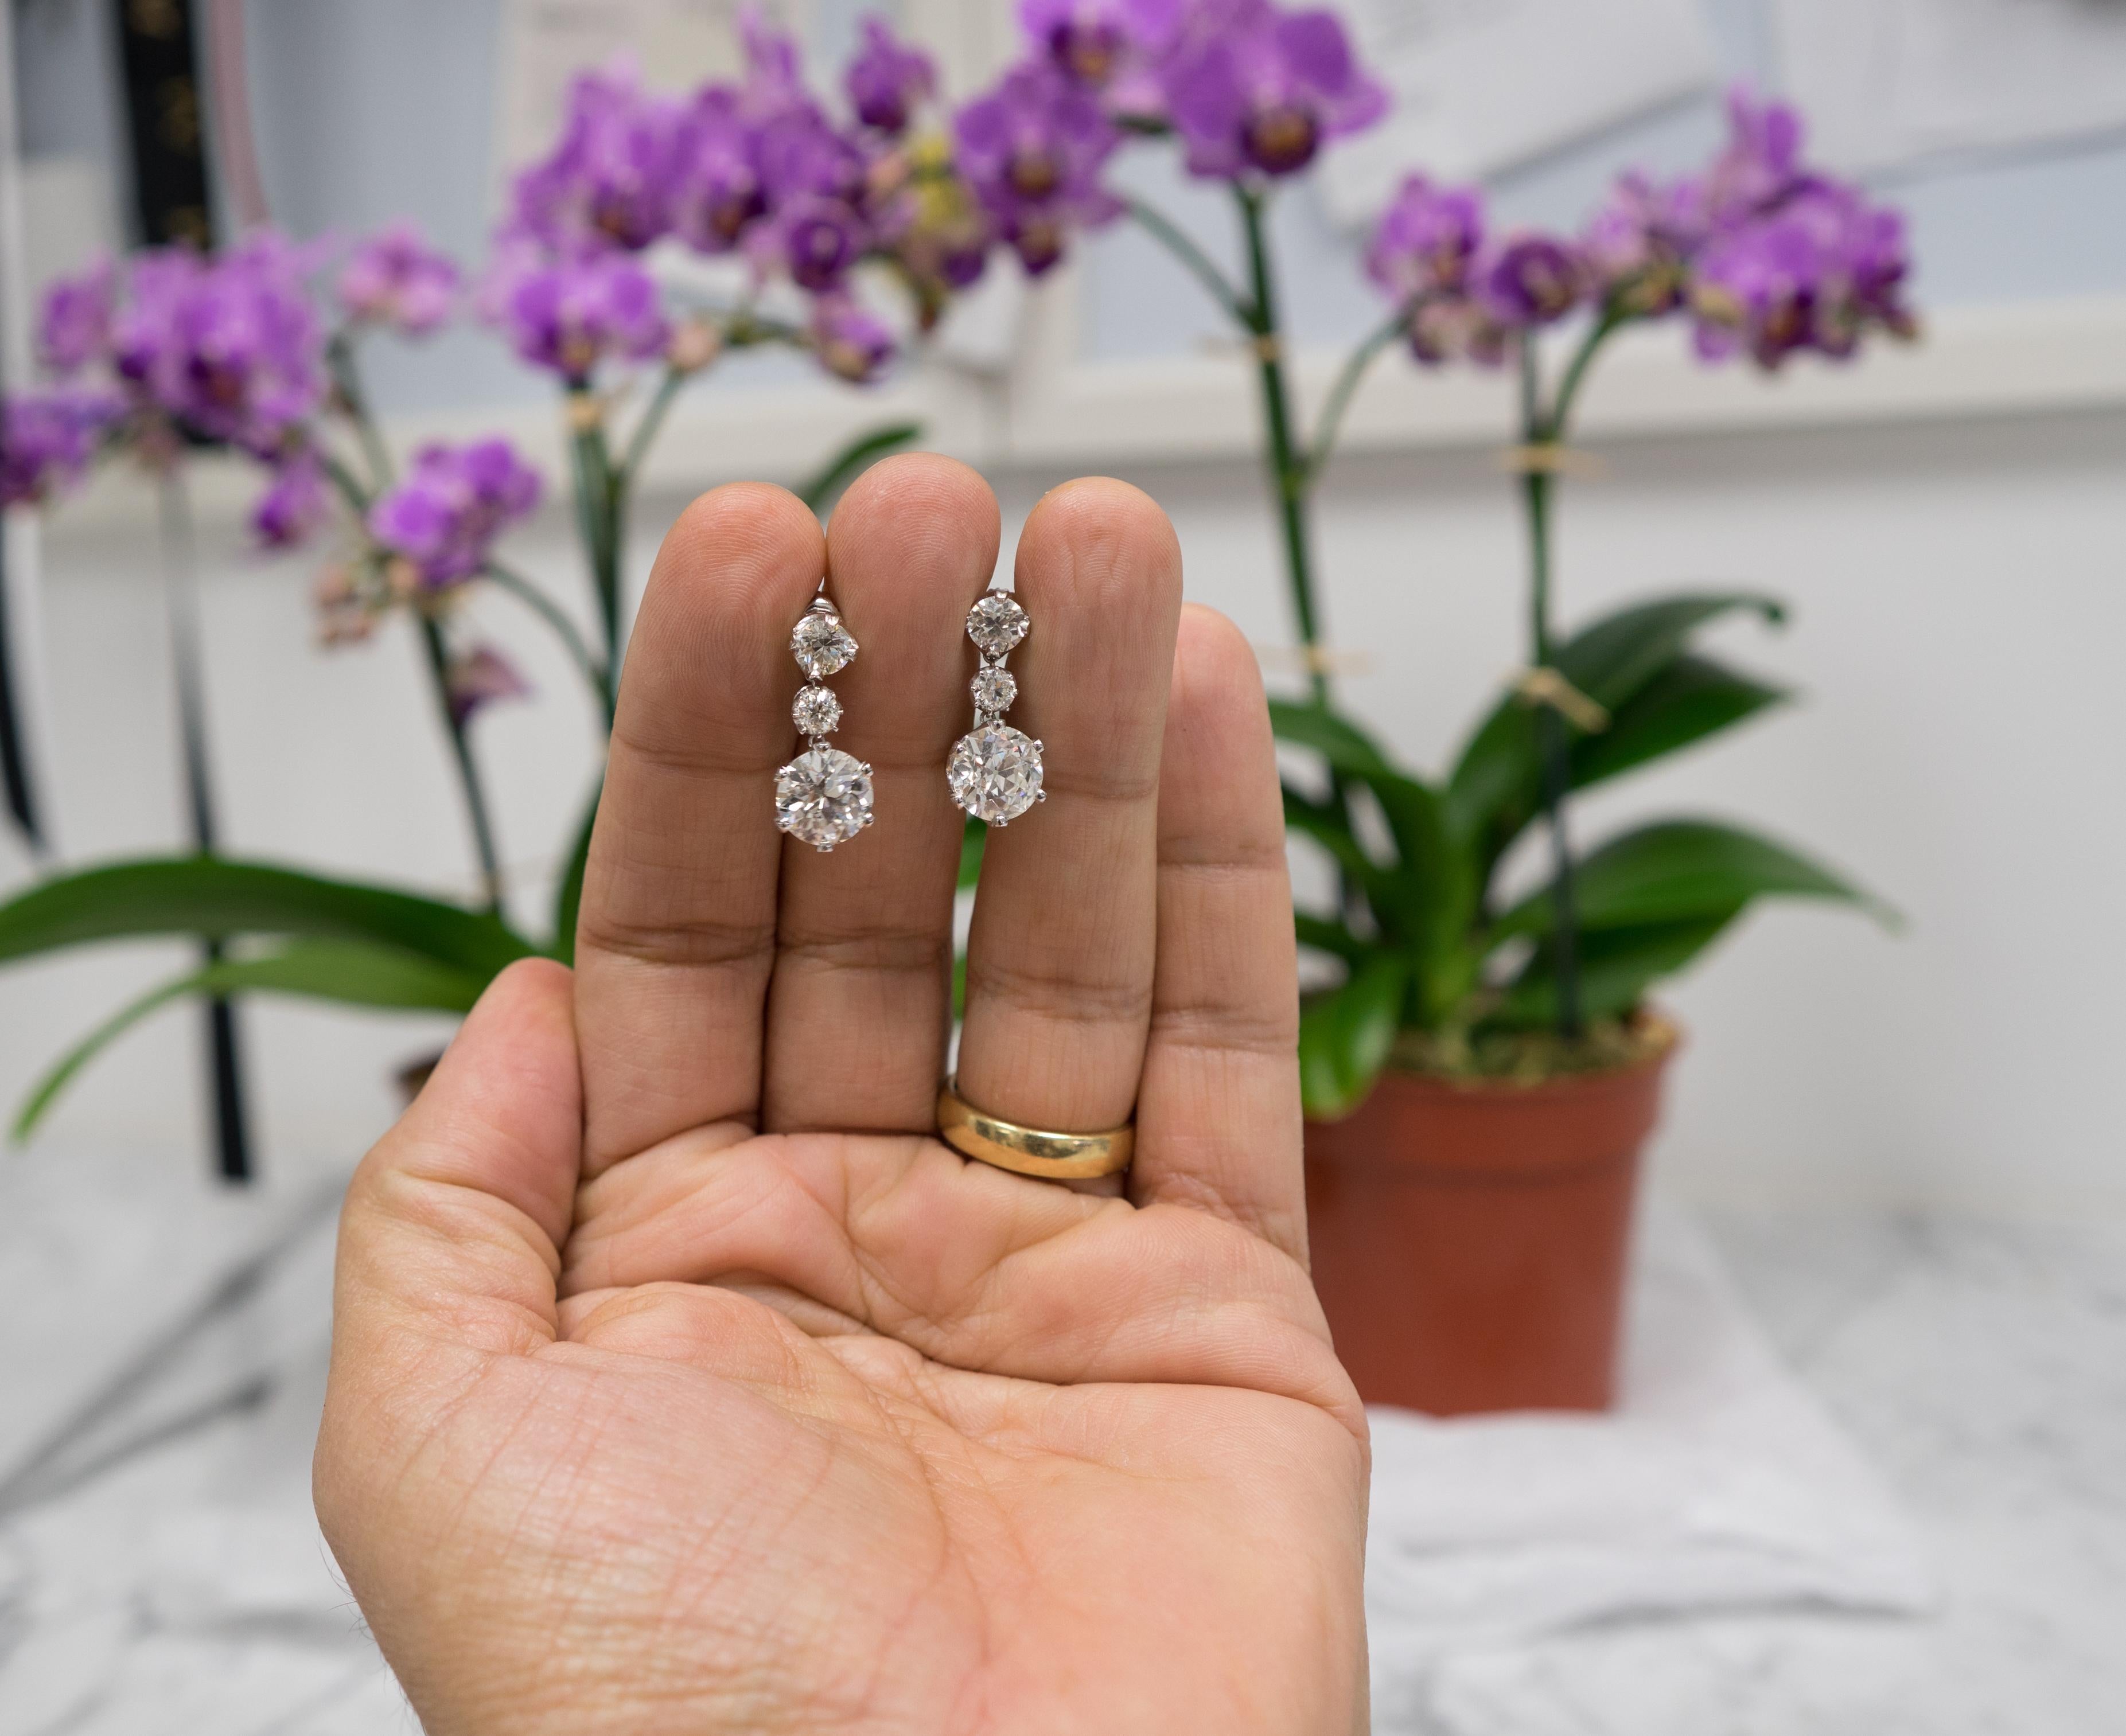 9.07 Carat total weight Dangling Old European Cut Diamond Earrings in Platinum
Pair of dangling earrings with 2 matched Old European Cut center diamonds weighing 6.93 carats total  complemented with 2 pairs of Old European Cut accent diamonds